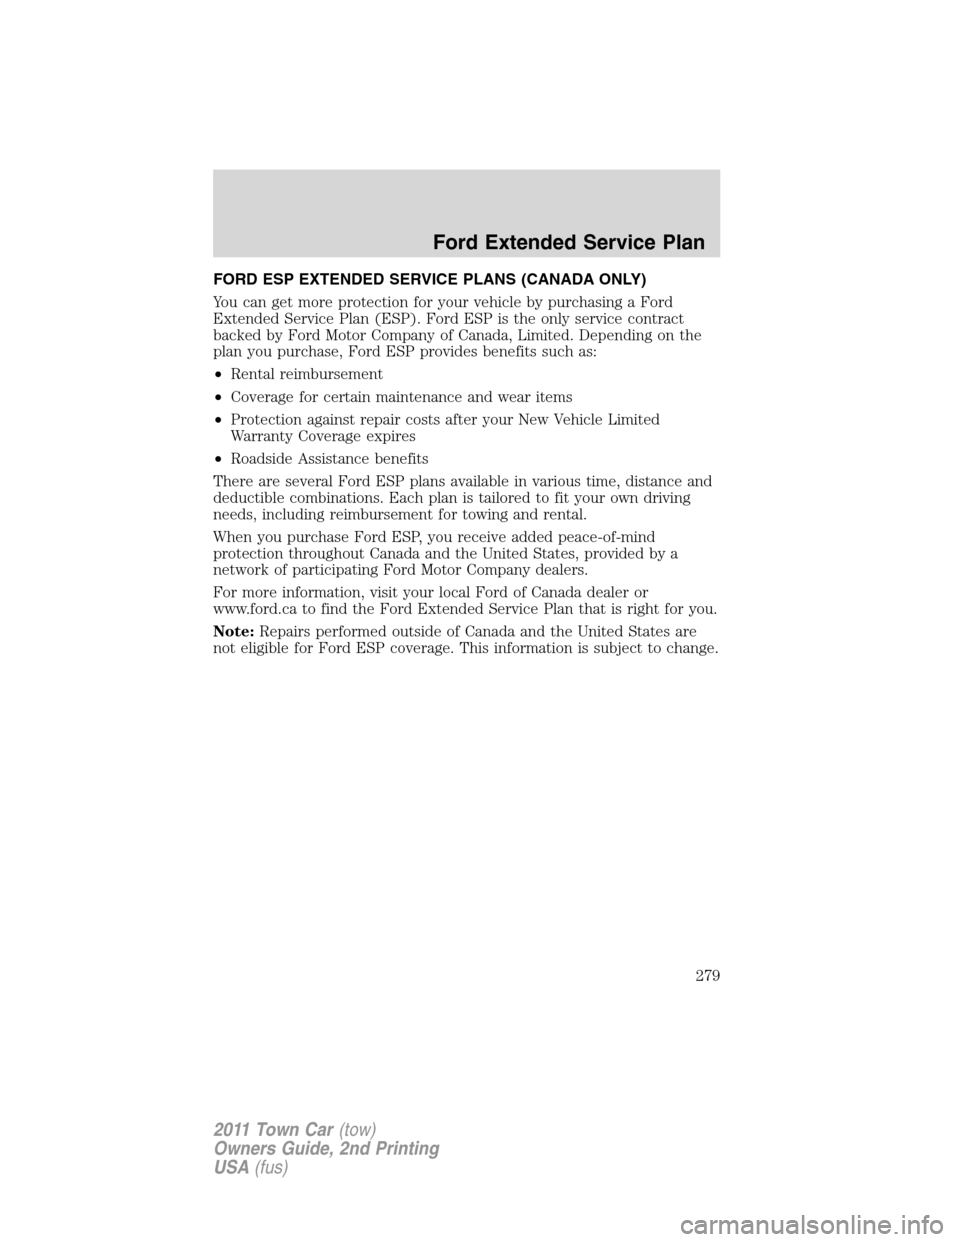 LINCOLN TOWN CAR 2011 Owners Manual FORD ESP EXTENDED SERVICE PLANS (CANADA ONLY)
You can get more protection for your vehicle by purchasing a Ford
Extended Service Plan (ESP). Ford ESP is the only service contract
backed by Ford Motor 